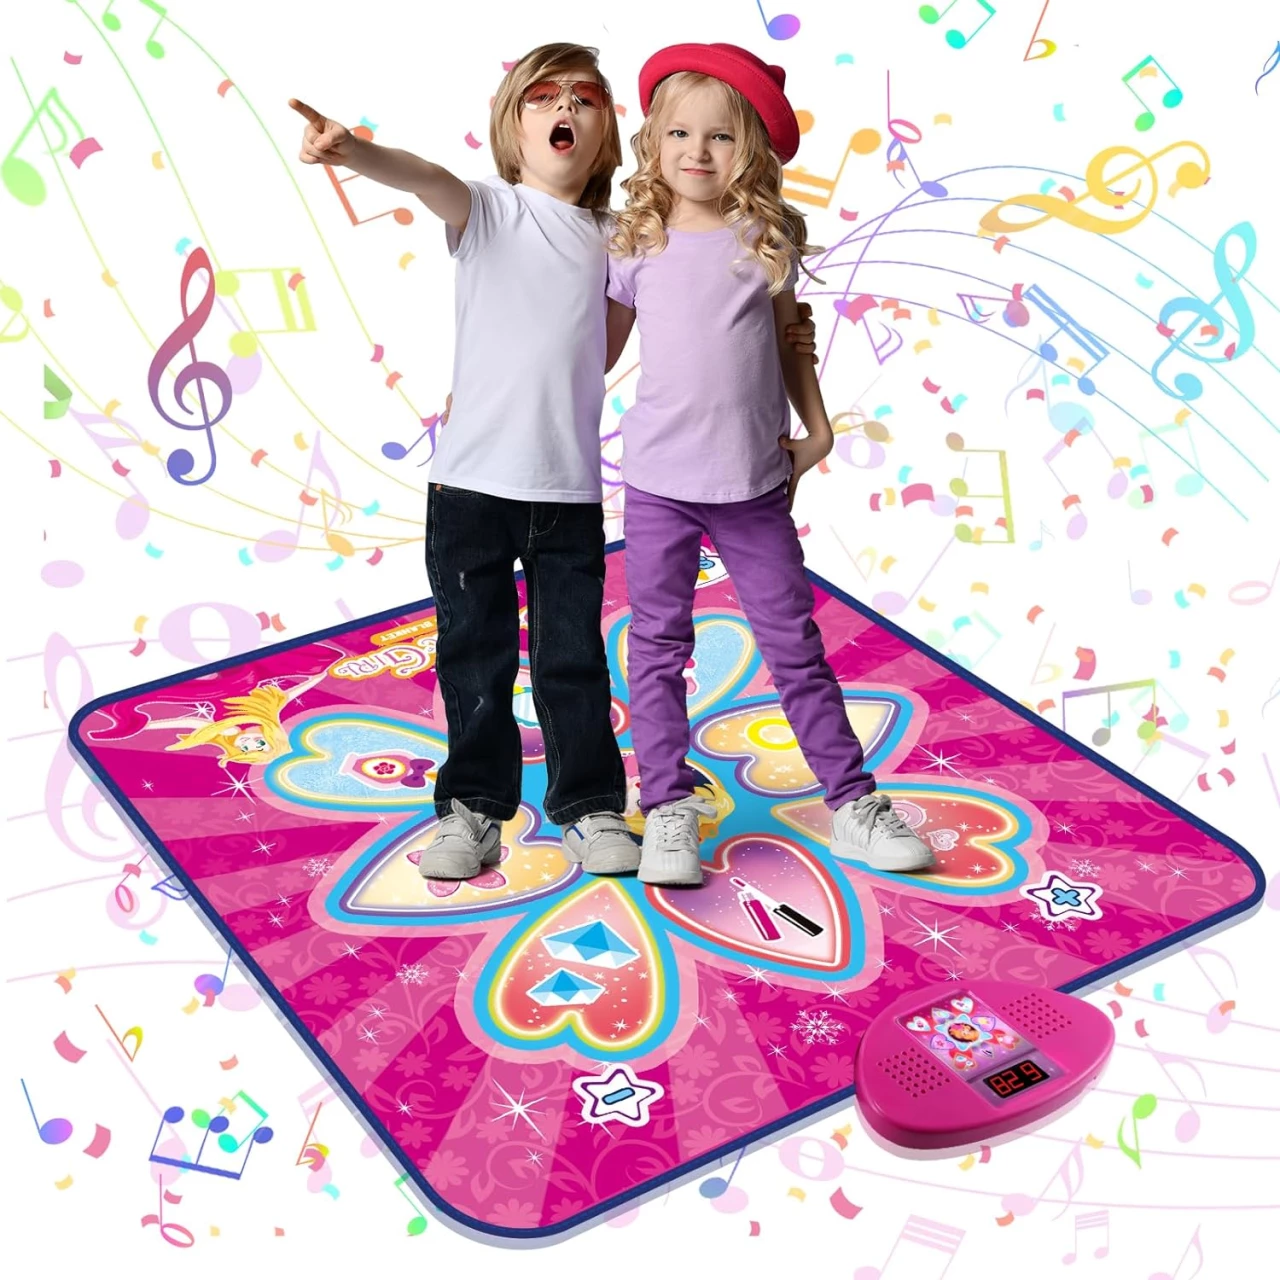 Coastaler Dance Mat Toys for Kids, 7 Game Modes Princess Electronic Dance Pad with LED Lights, Music Dance Game Toy Christmas Birthday Gifts for Girls Age 3 4 5 6 7 8 9 10 12 Year Old